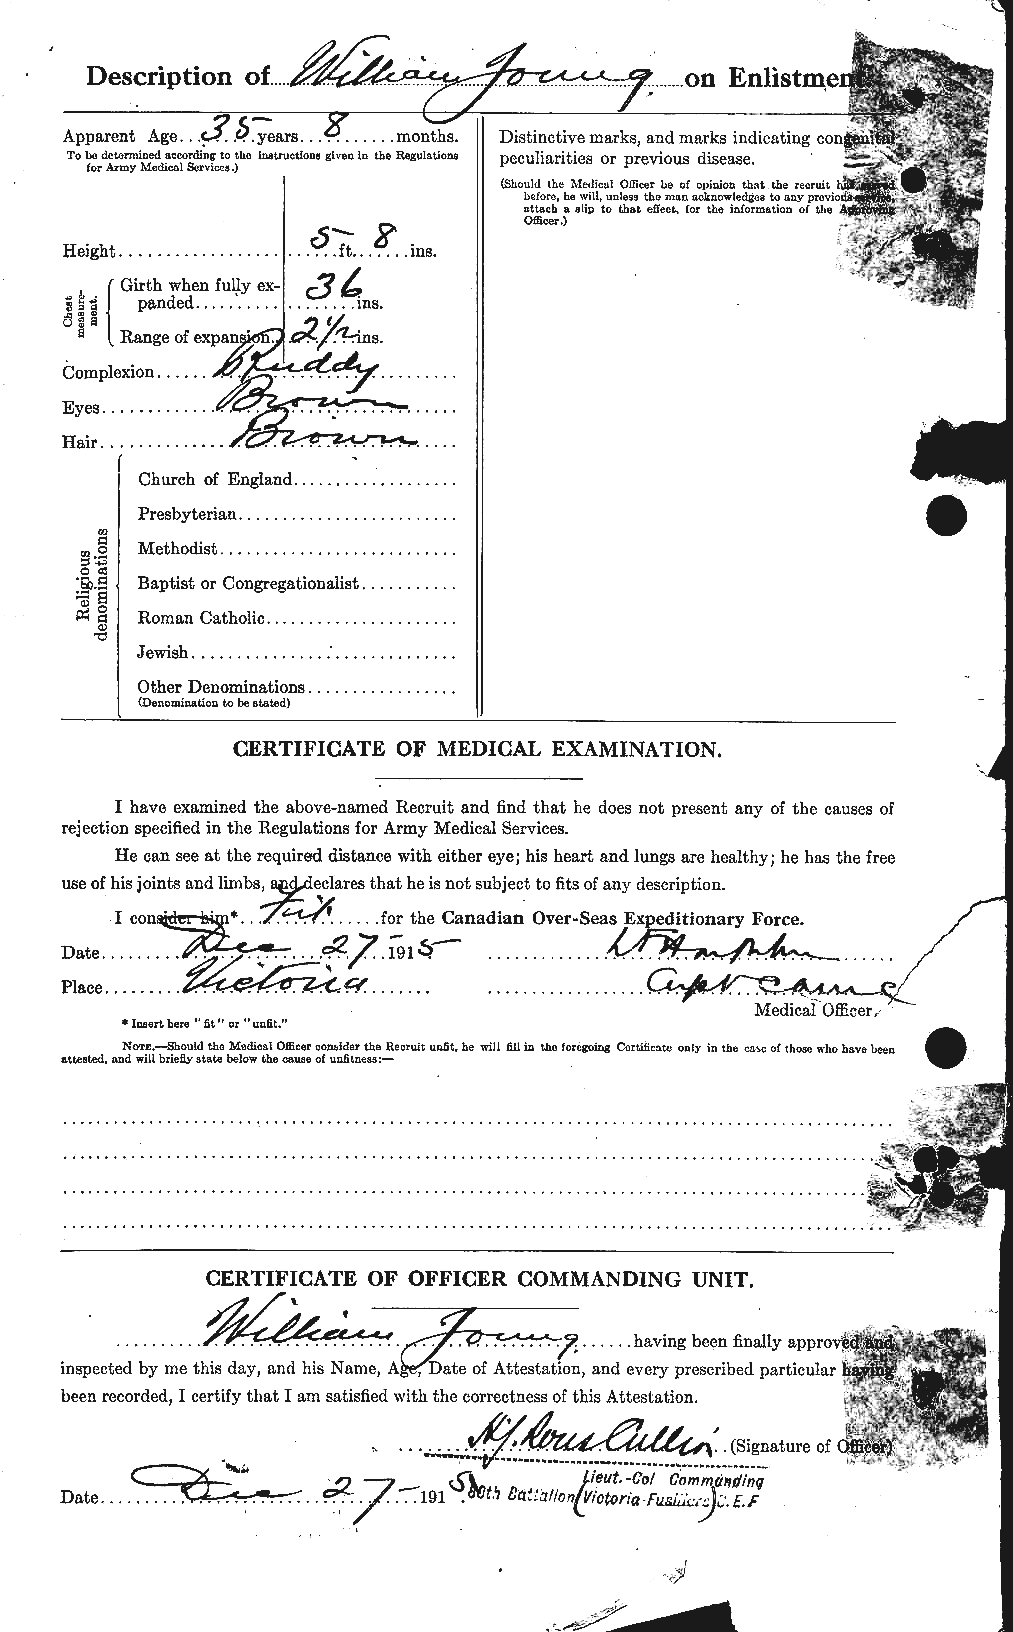 Personnel Records of the First World War - CEF 687982b